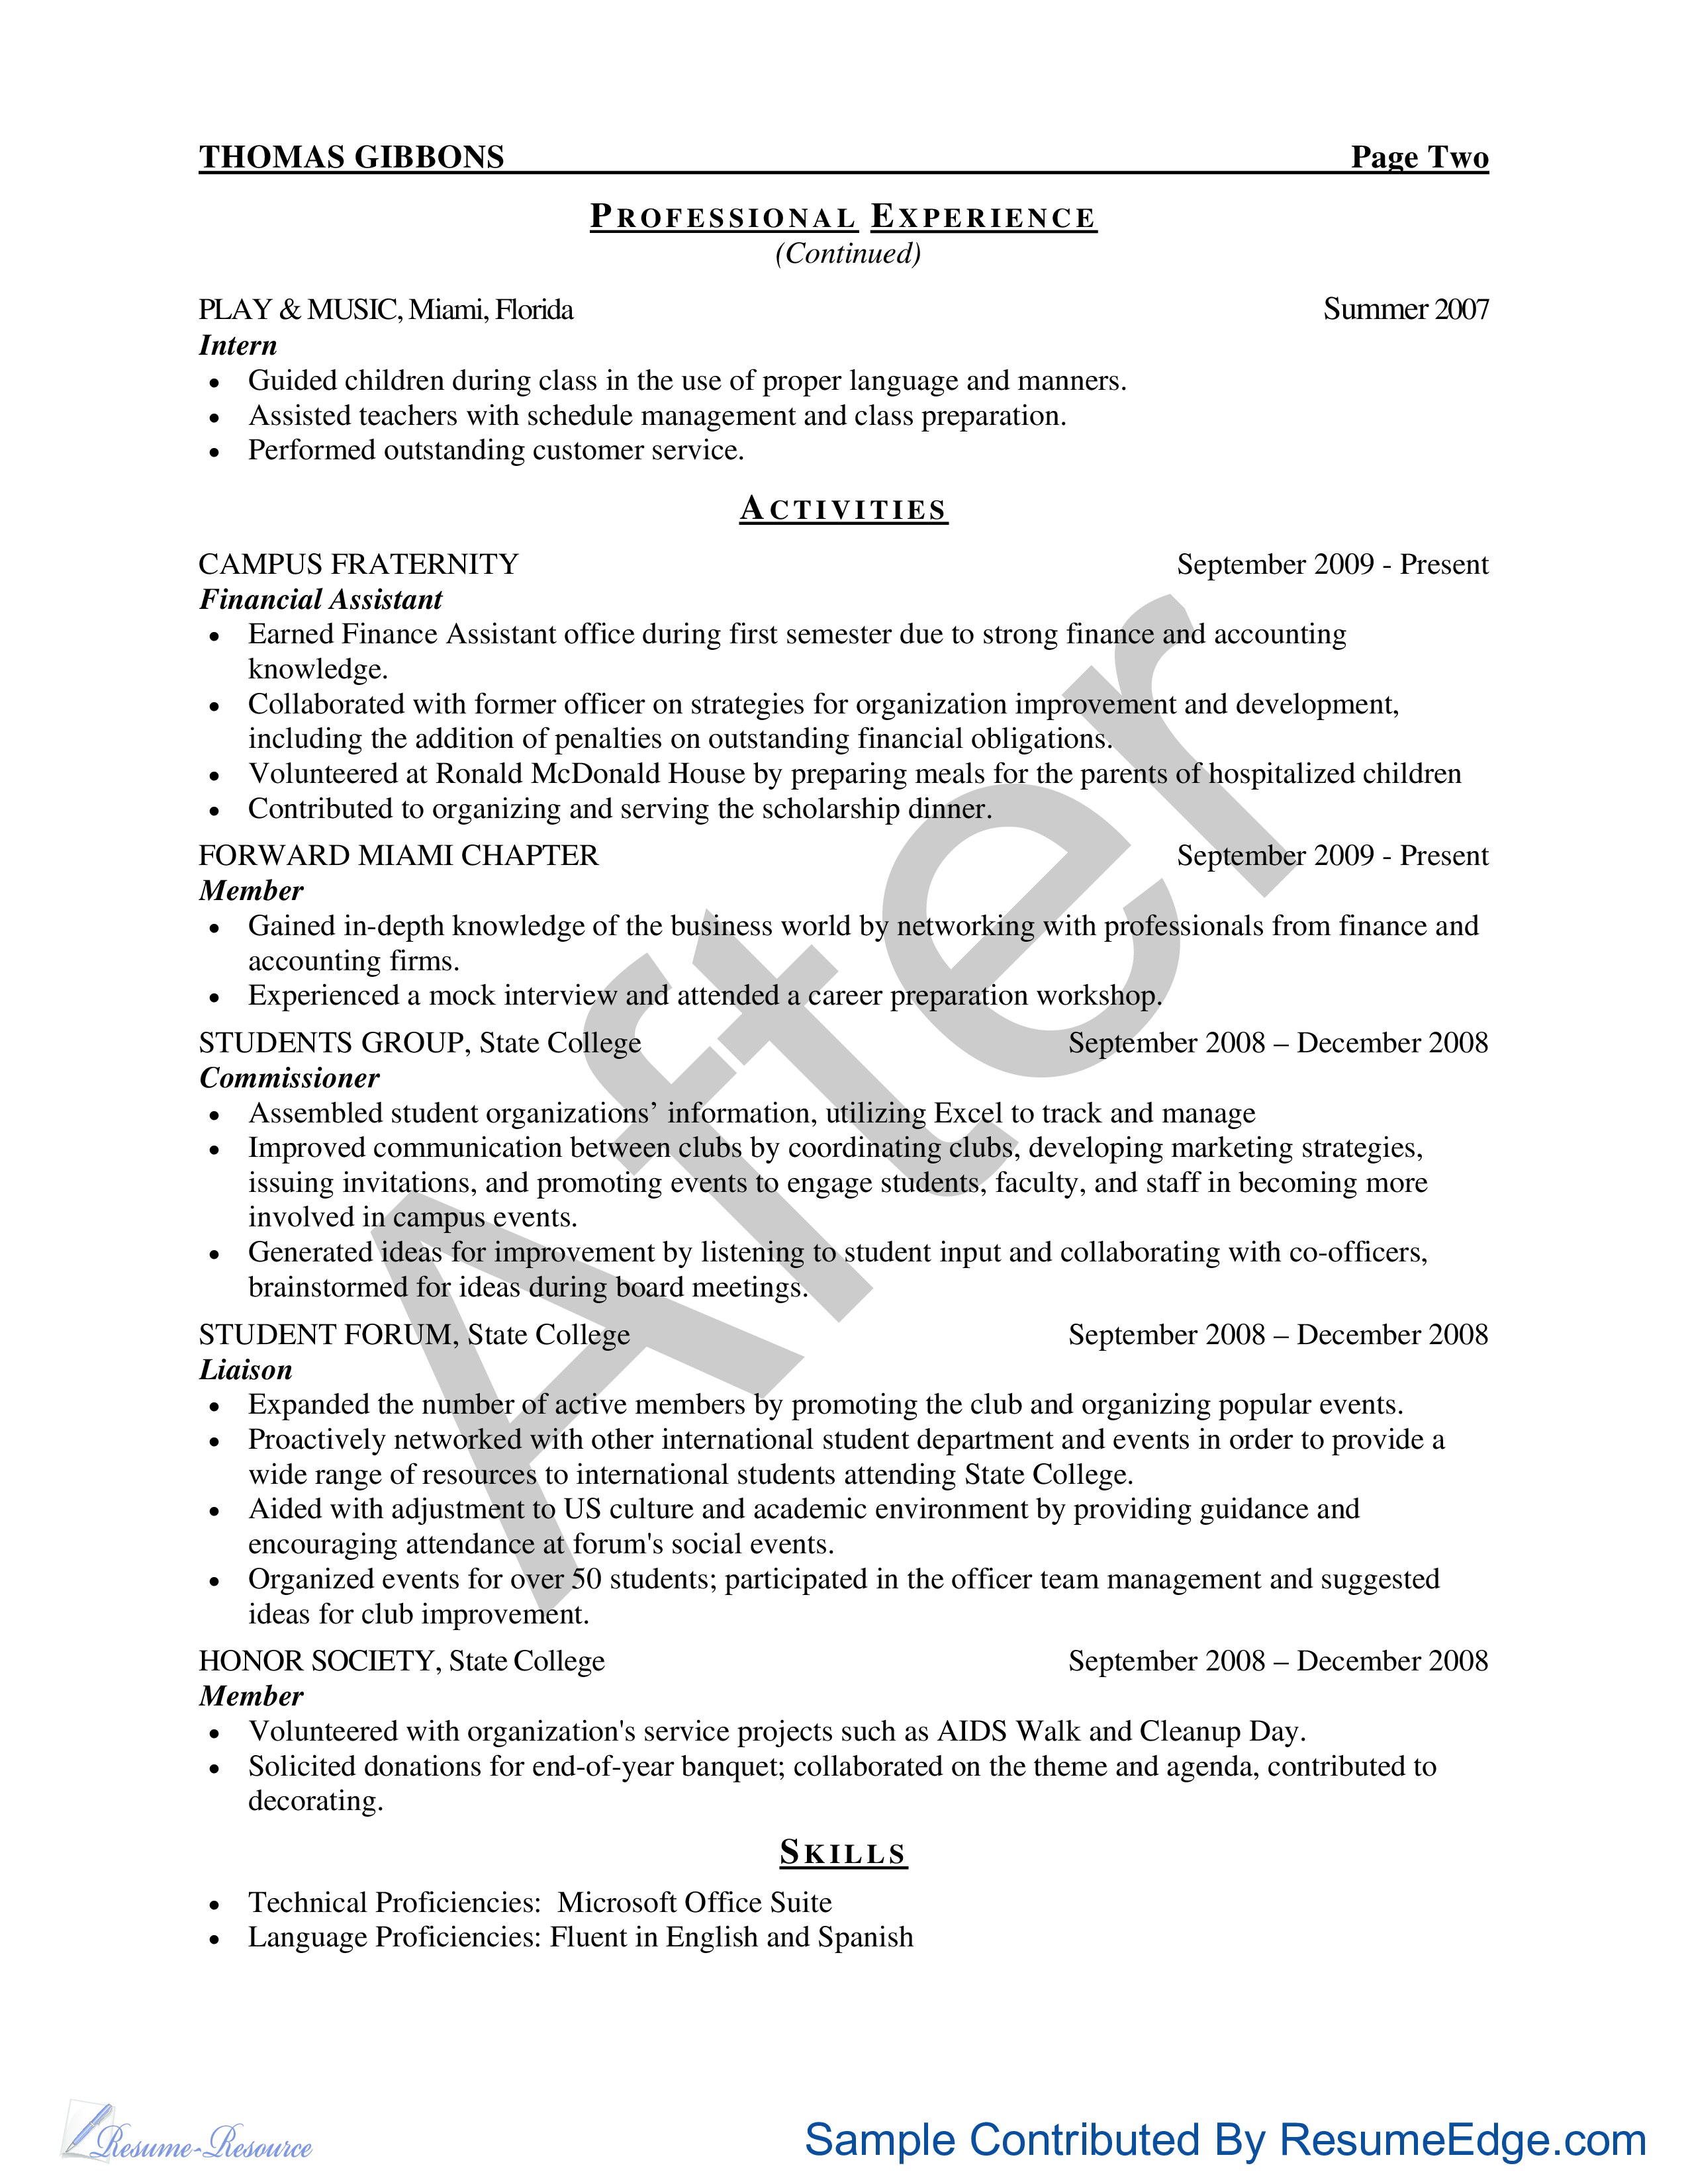 sample resume for hr internship with no experience